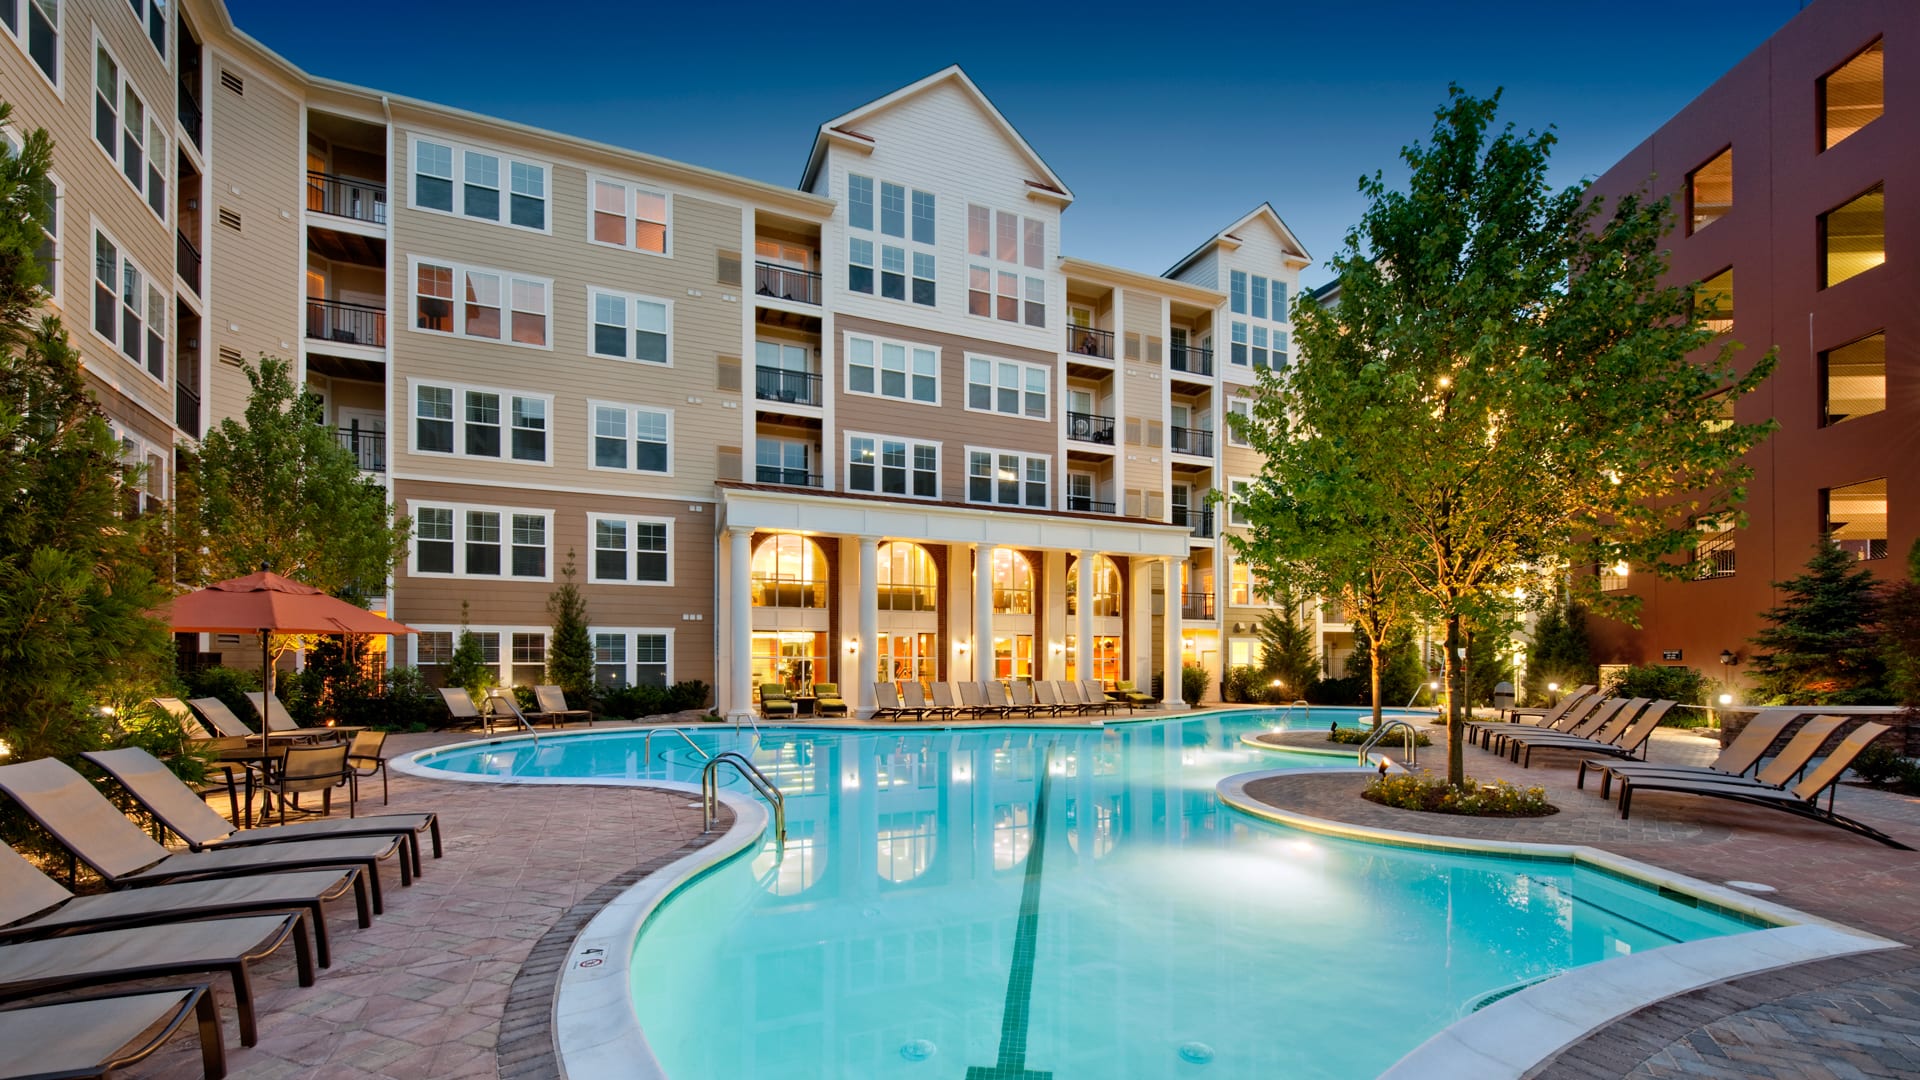 Westchester Rockville Station Apartments - Swimming Pool